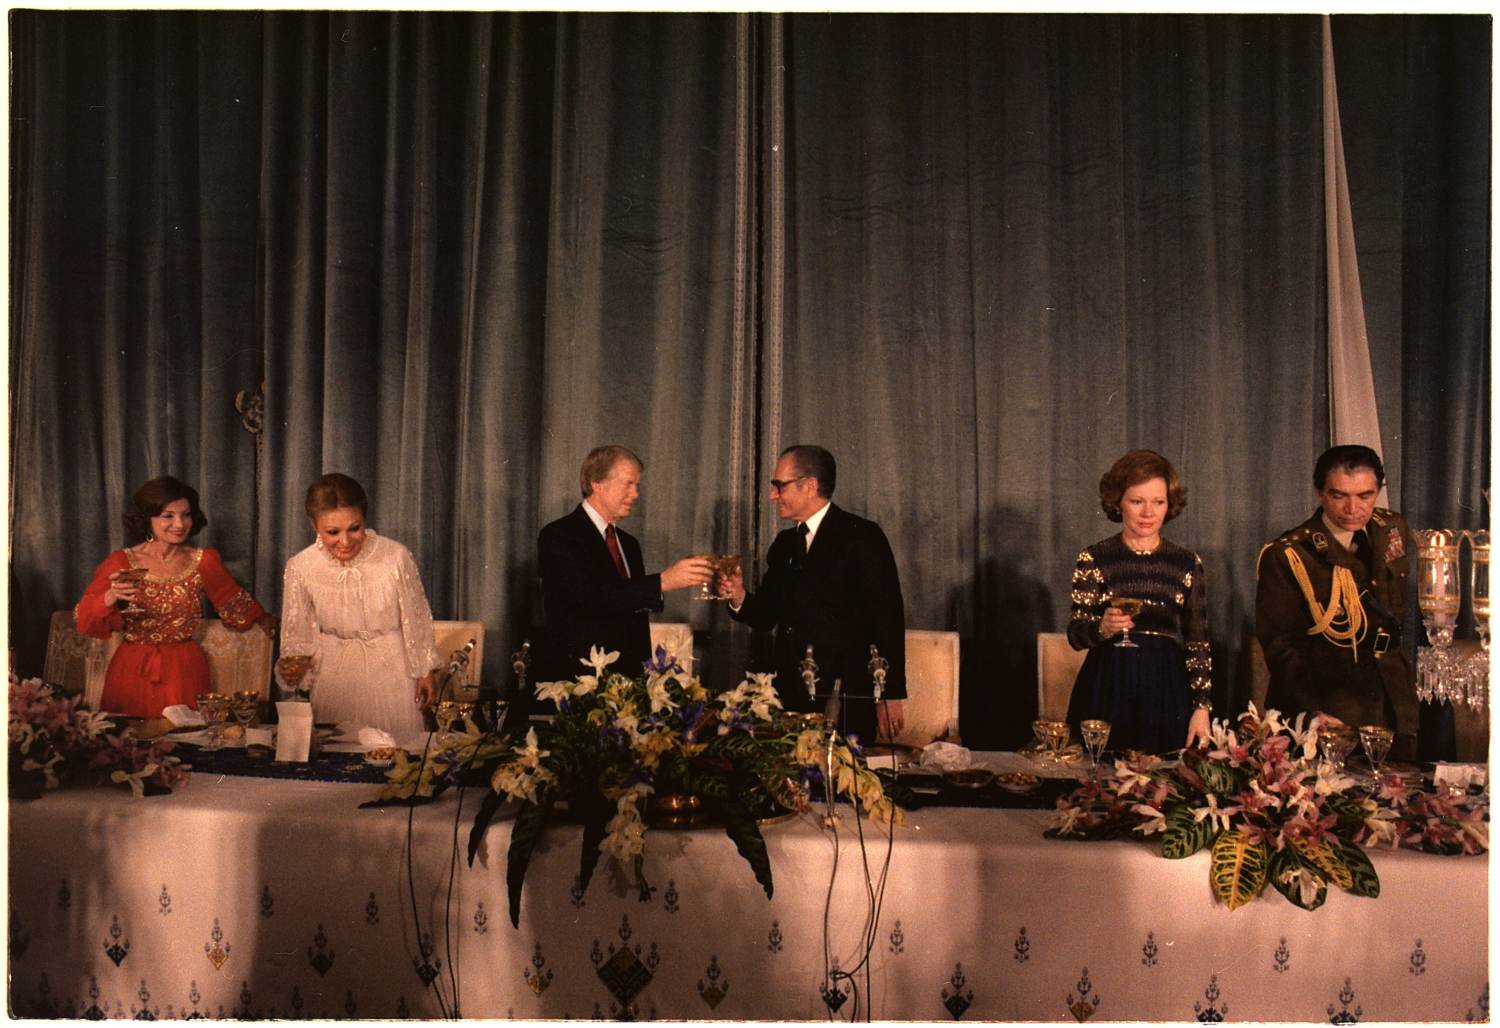 Jimmy Carter and the Shah toast at a State Dinner hosted by the Shah of Iran.. Source: U.S. National Archives and Records Administration